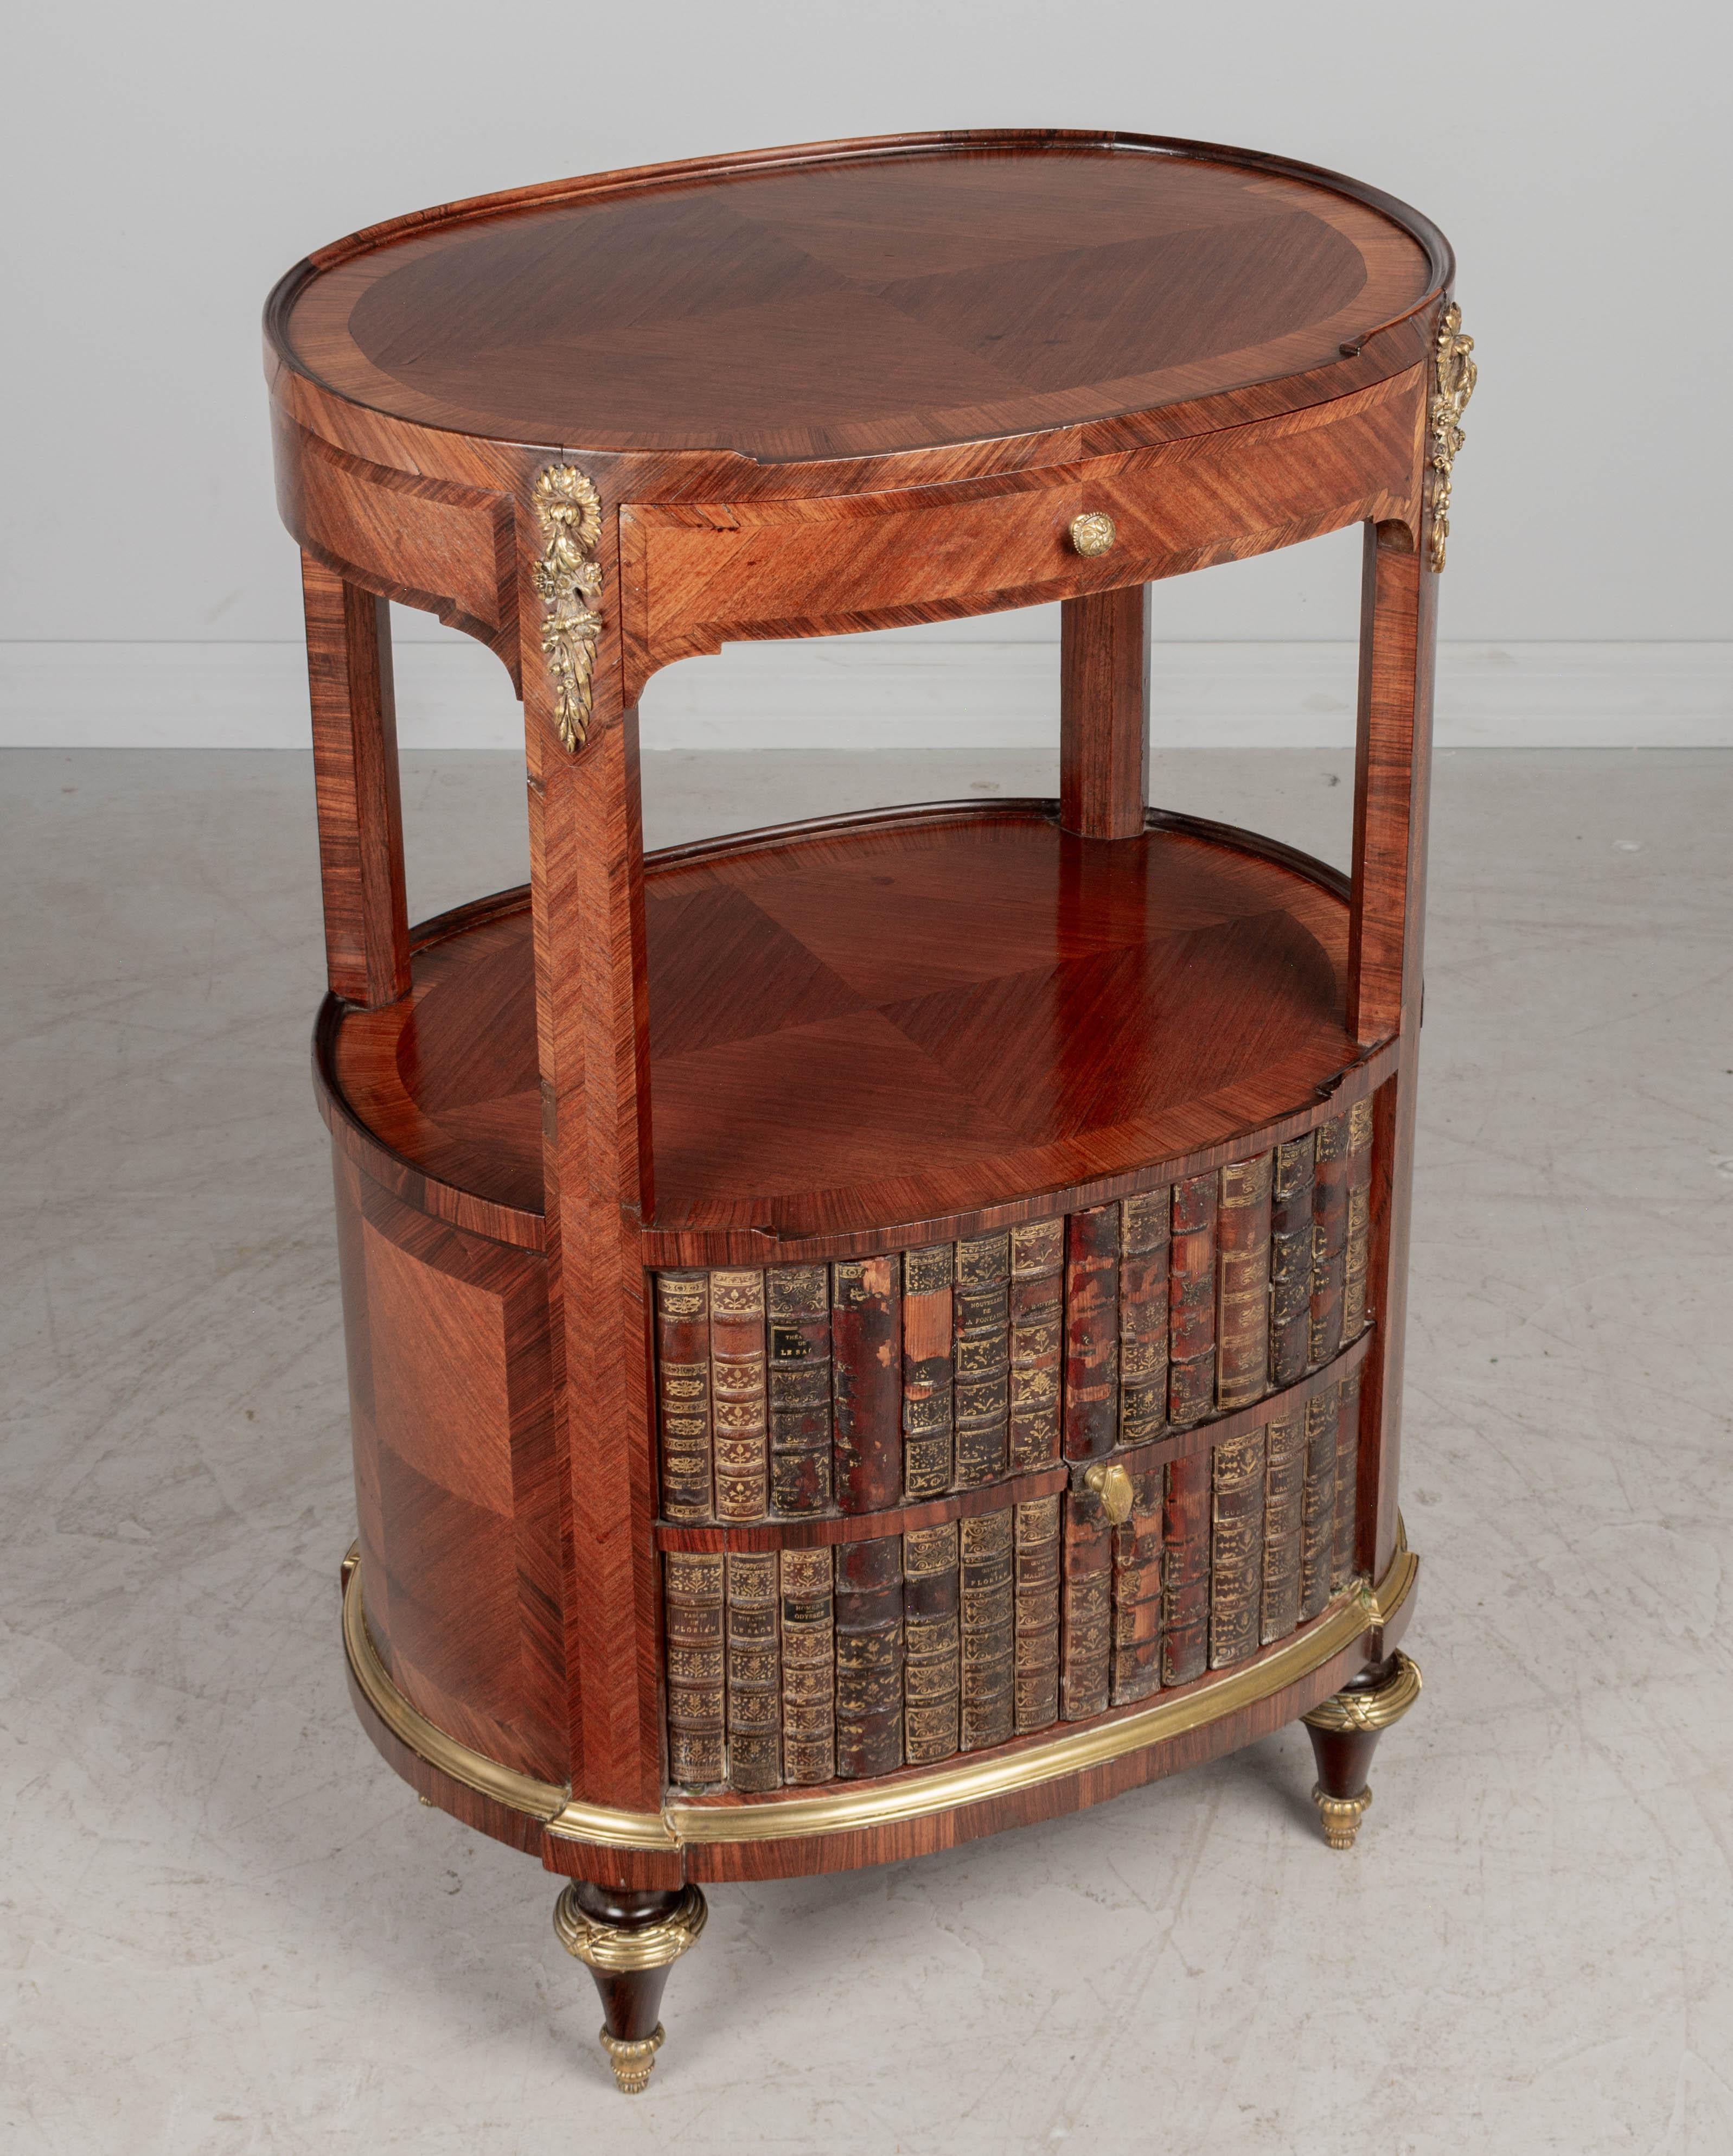 A fine early 20th century French Louis XVI style oval marquetry side table with faux livres doors. Made of mahogany with rosewood veneer and finished on all sides. Good quality cast bronze decorative hardware. Gold embossed leather book spines are